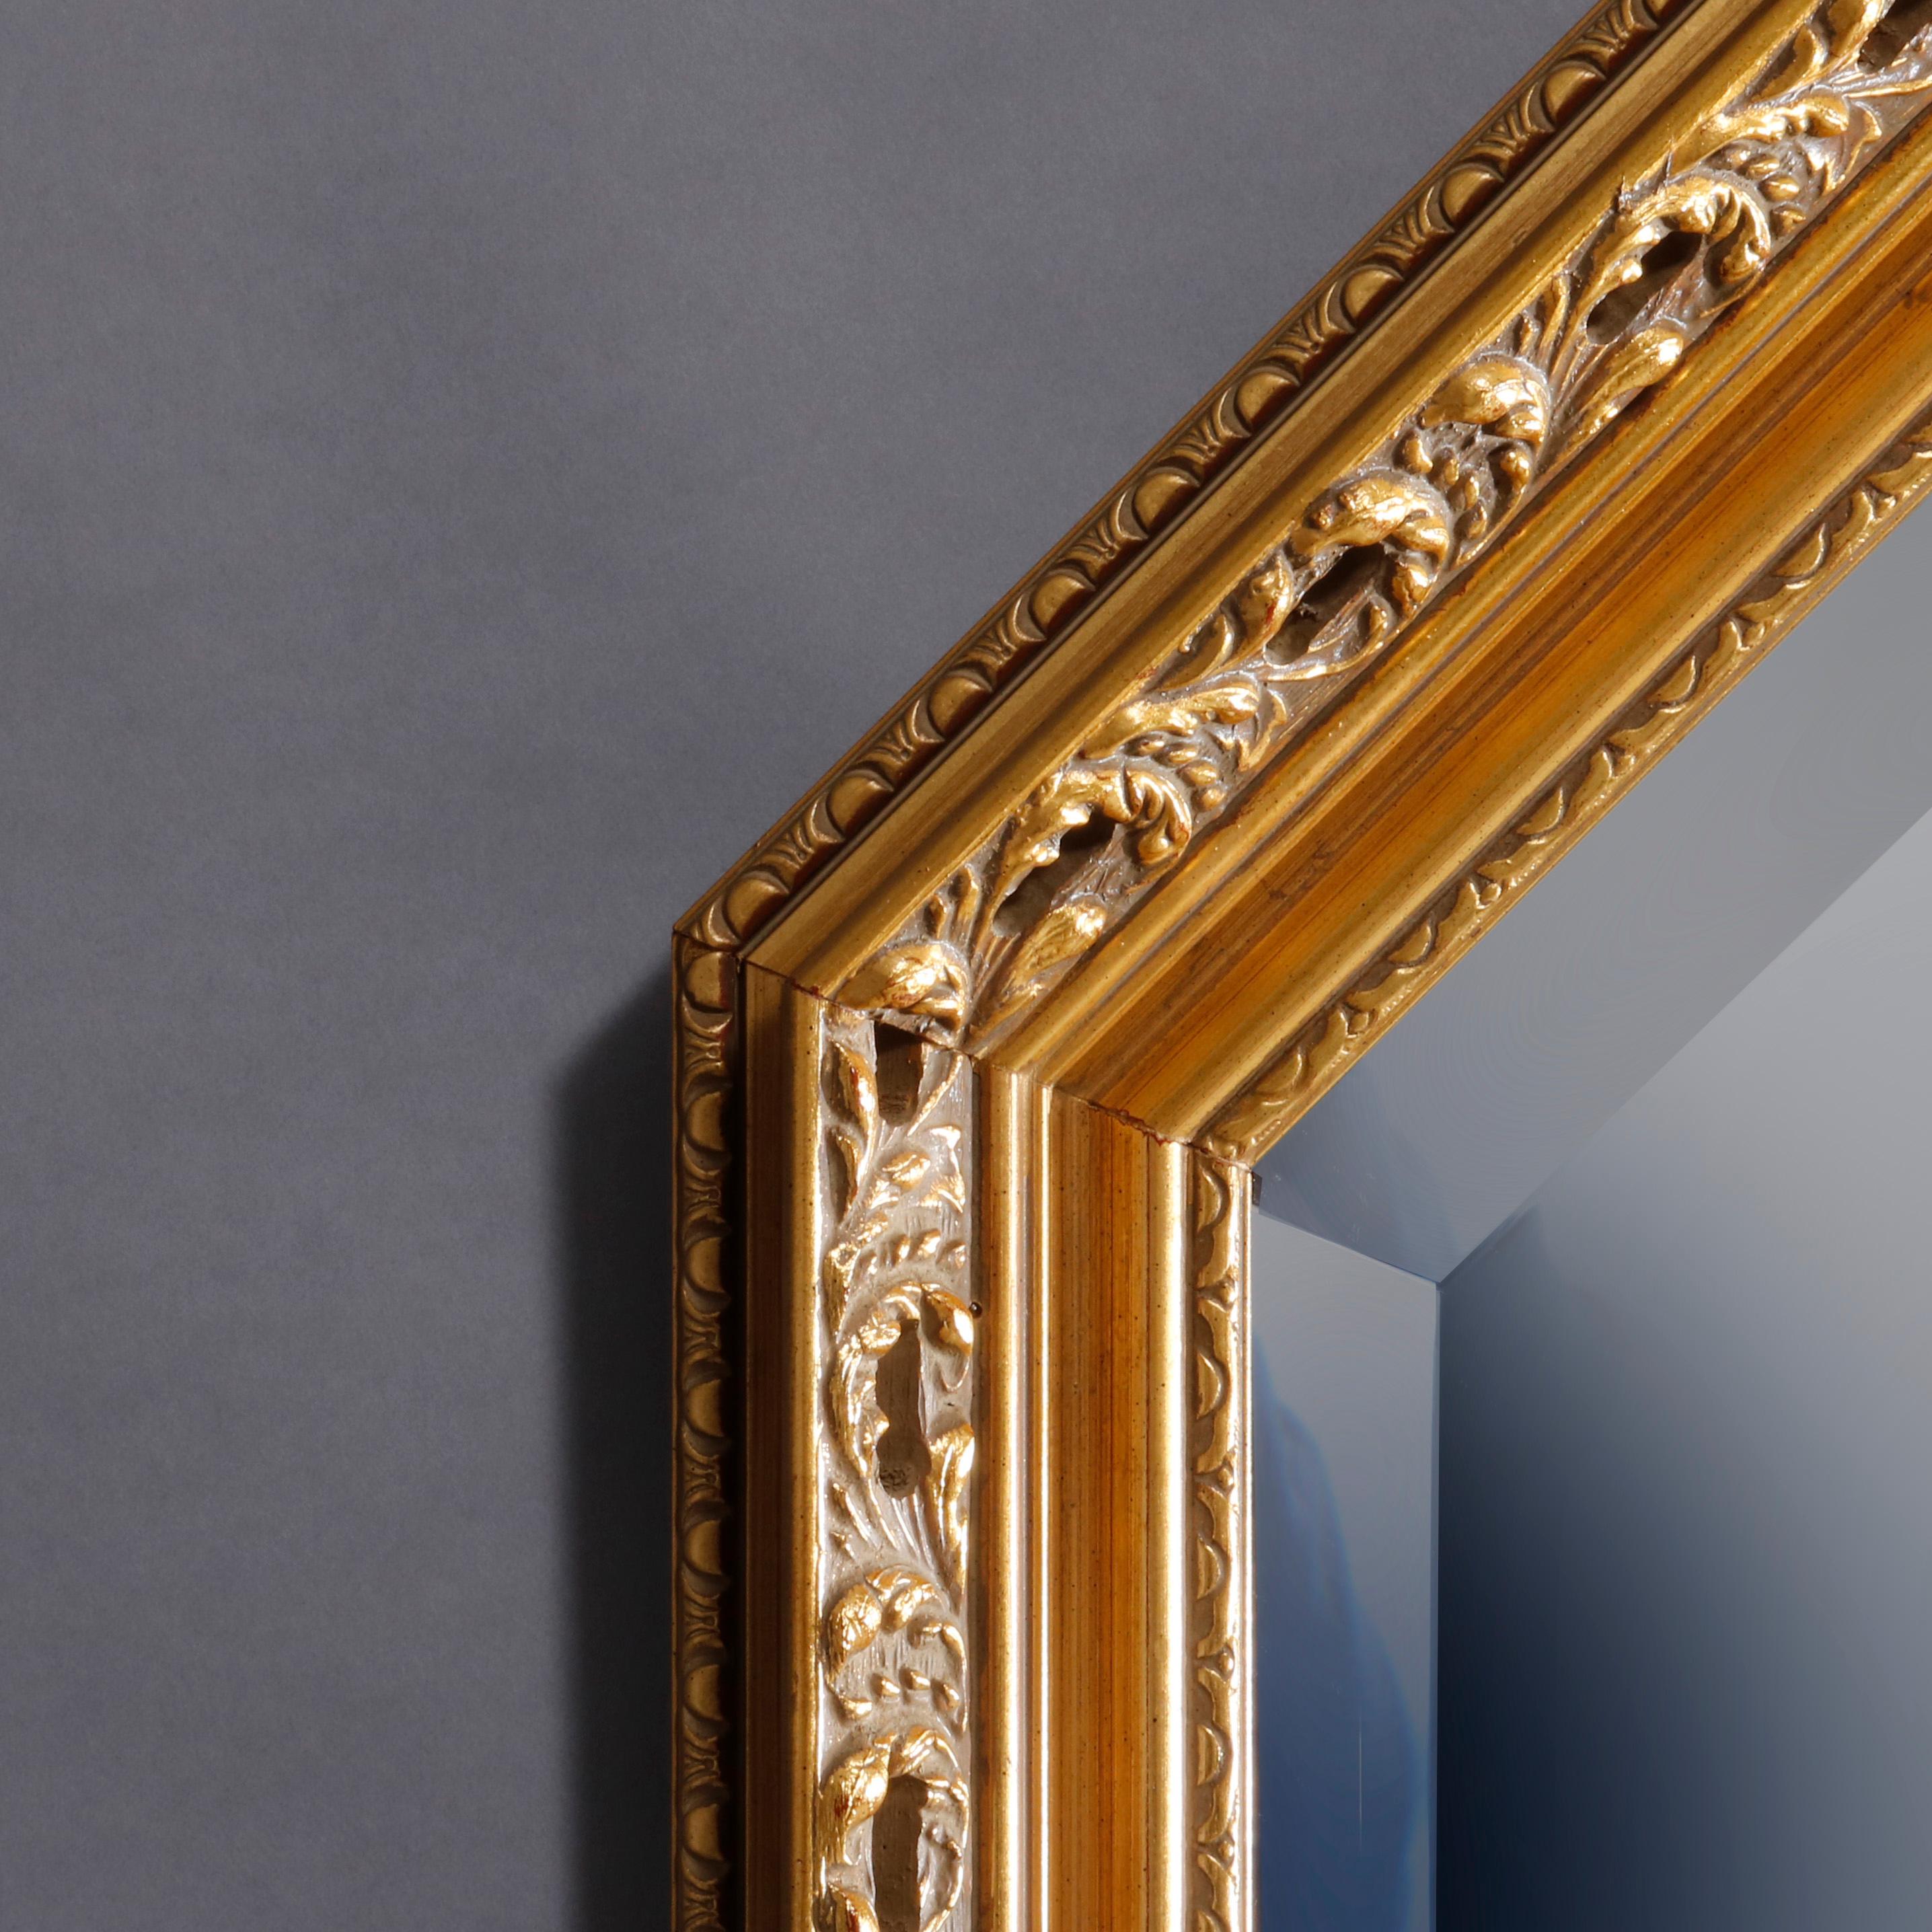 A vintage and large Continental style wall mirror offers giltwood foliate frame housing beveled mirror, 20th century

Measures: 41.75